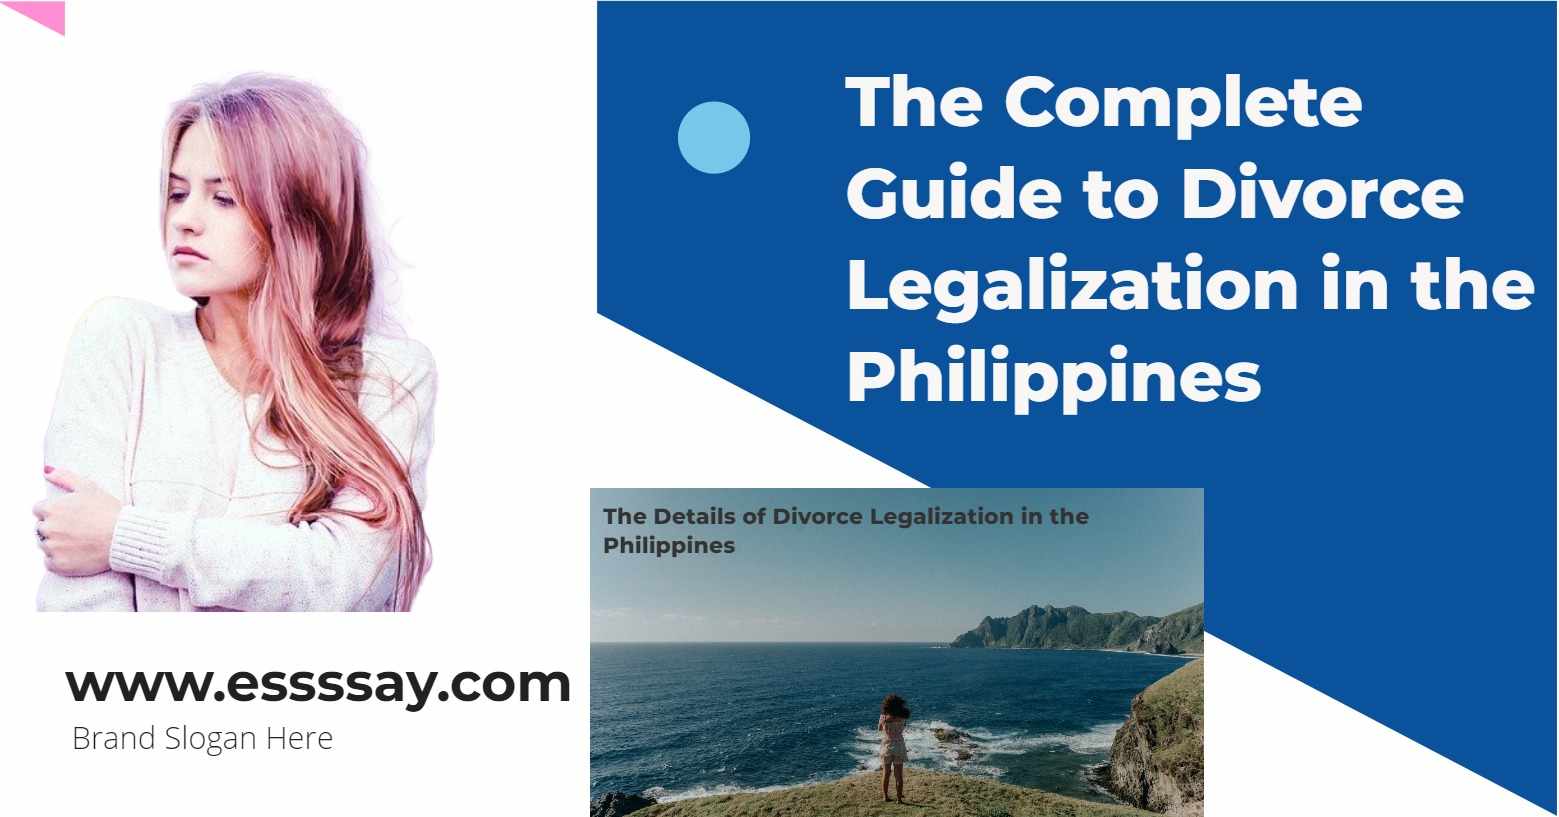 EssayThe Complete Guide to Divorce Legalization in the Philippines